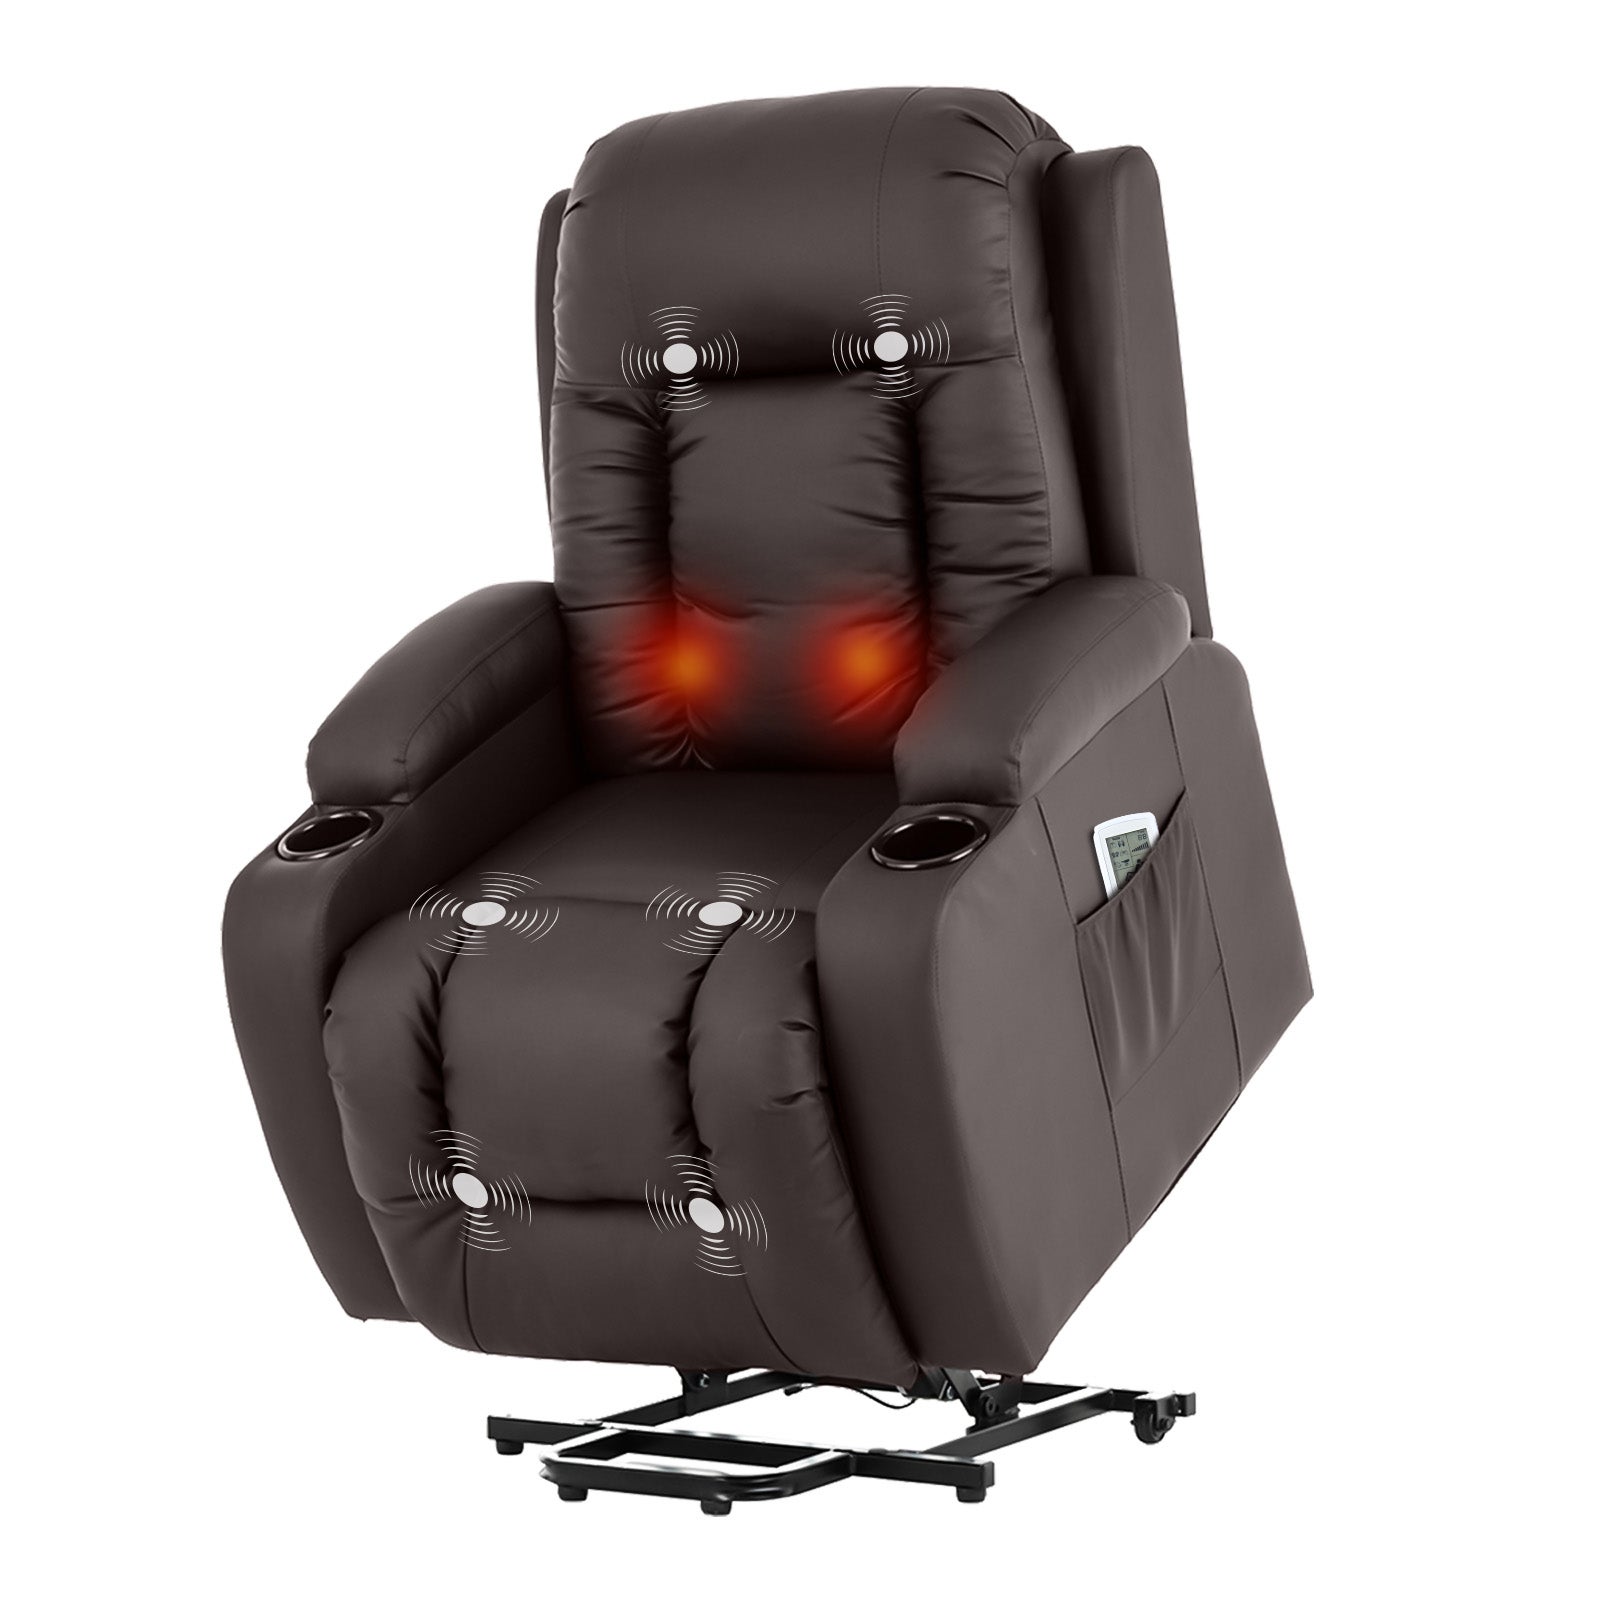 Advwin Electric Lift Recliner Chair Massage Chair PU Leather Brown